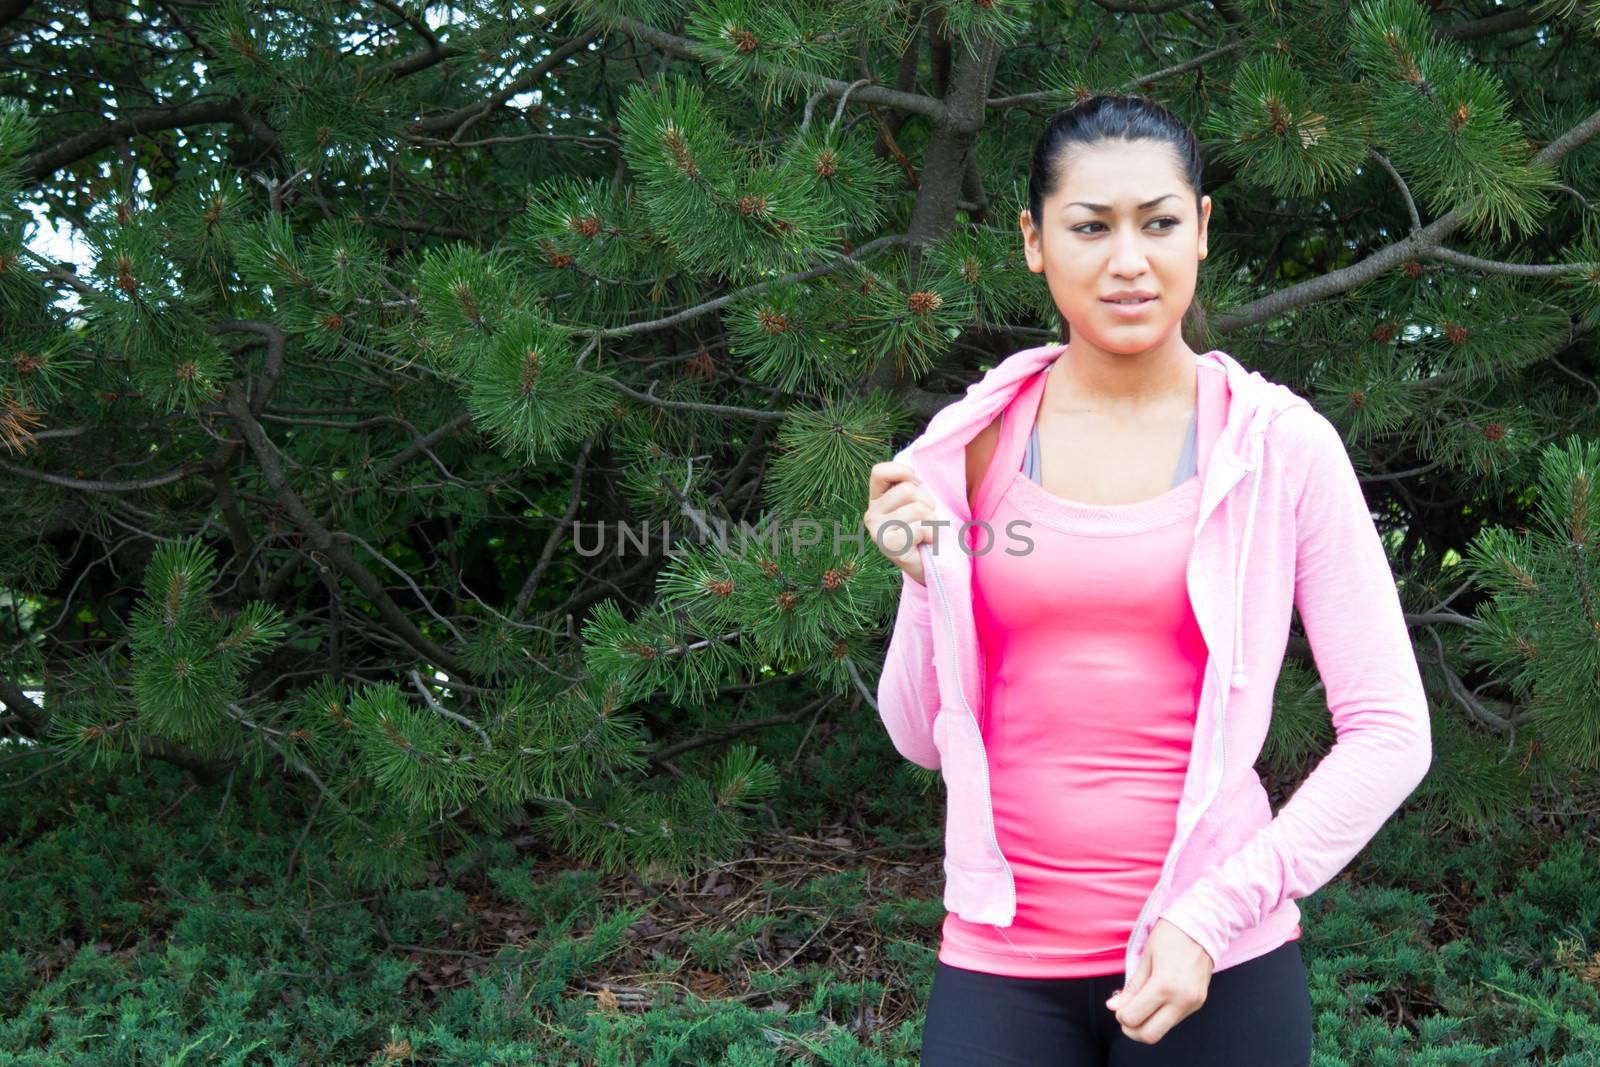 Young woman removing her jacket before a workout